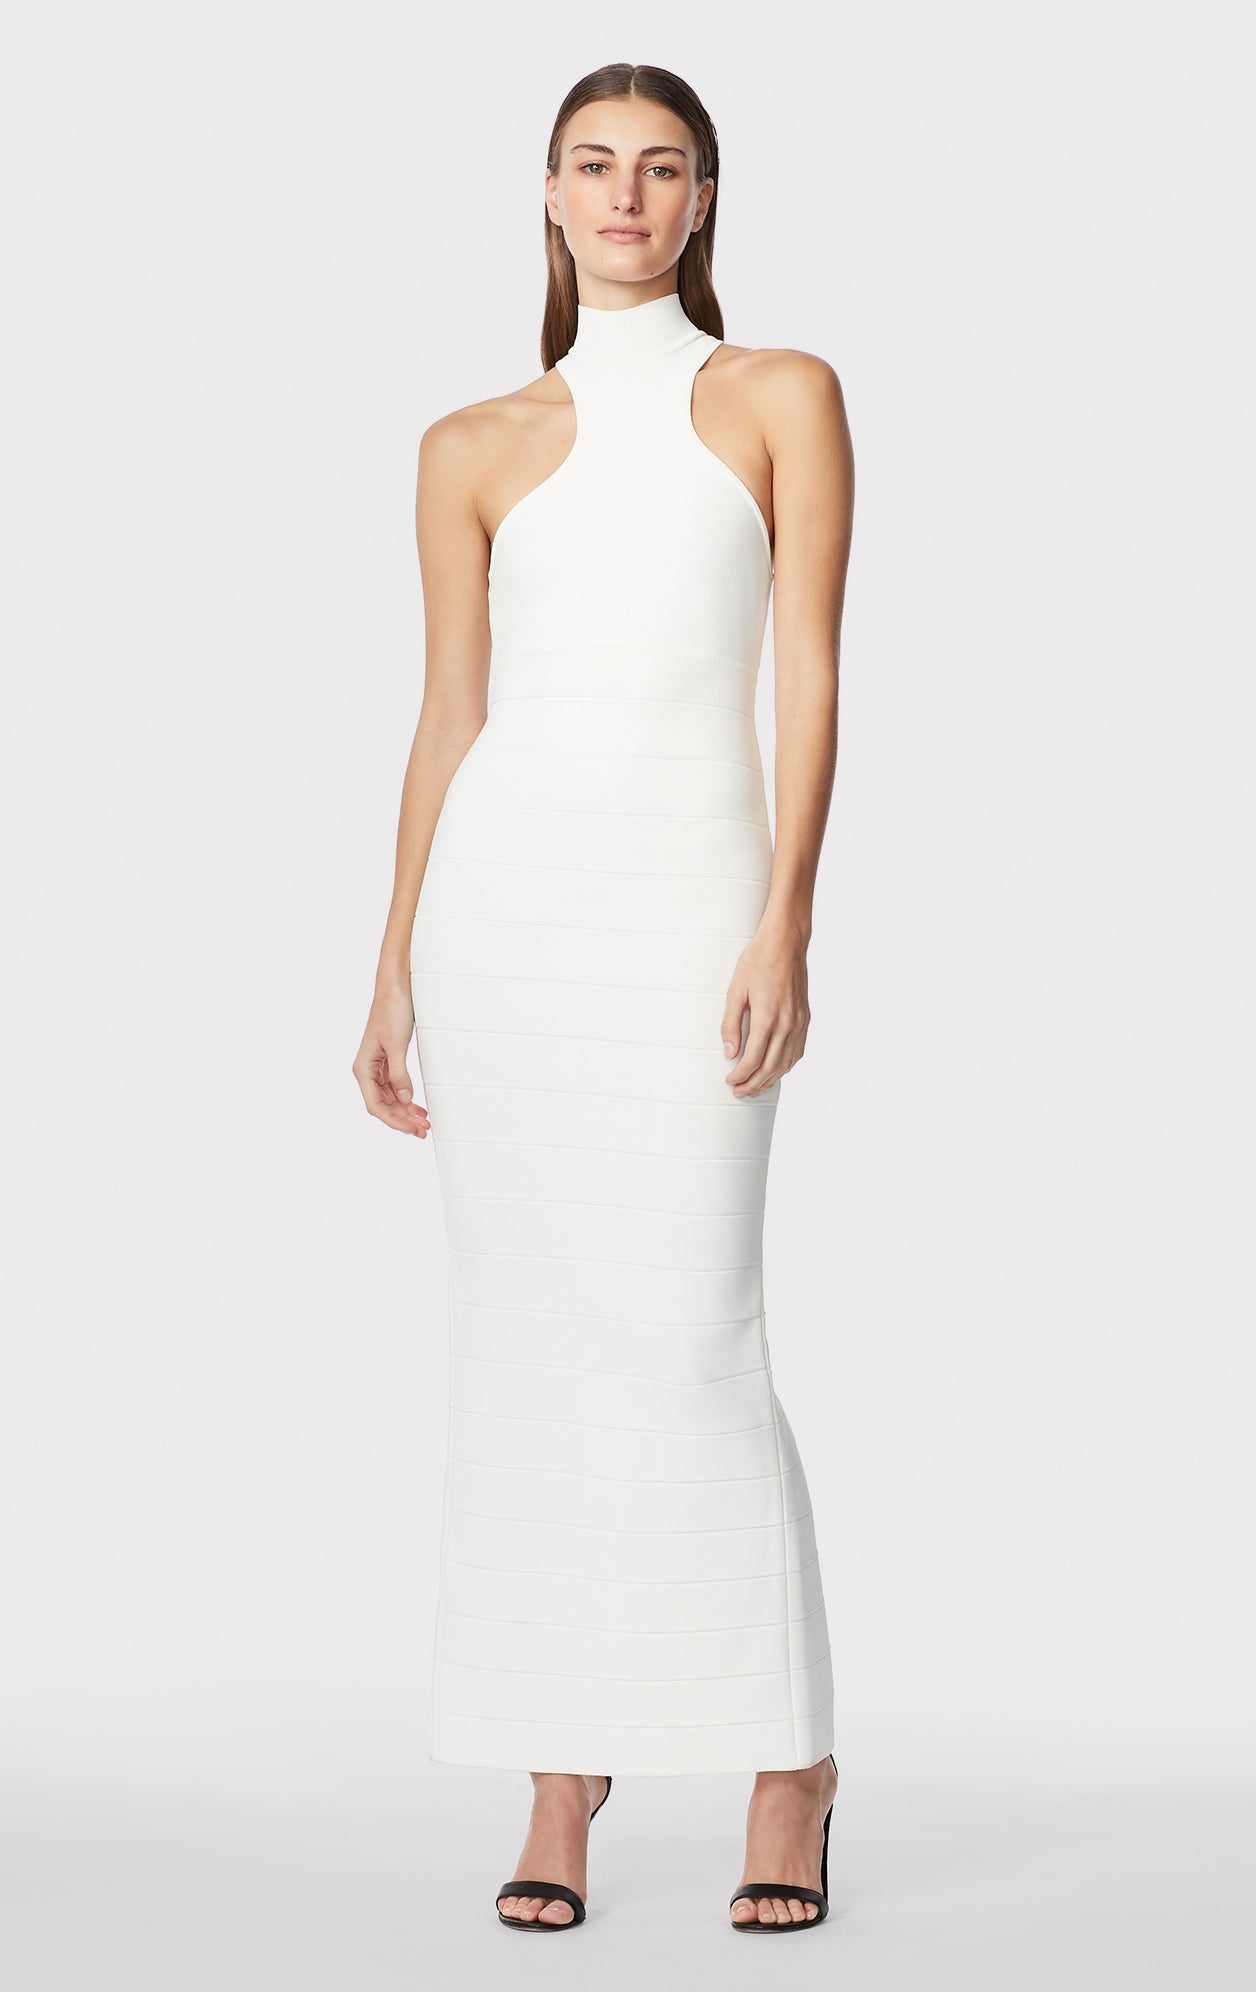 RACER ICON CROPPED GOWN – HERVÉ LÉGER